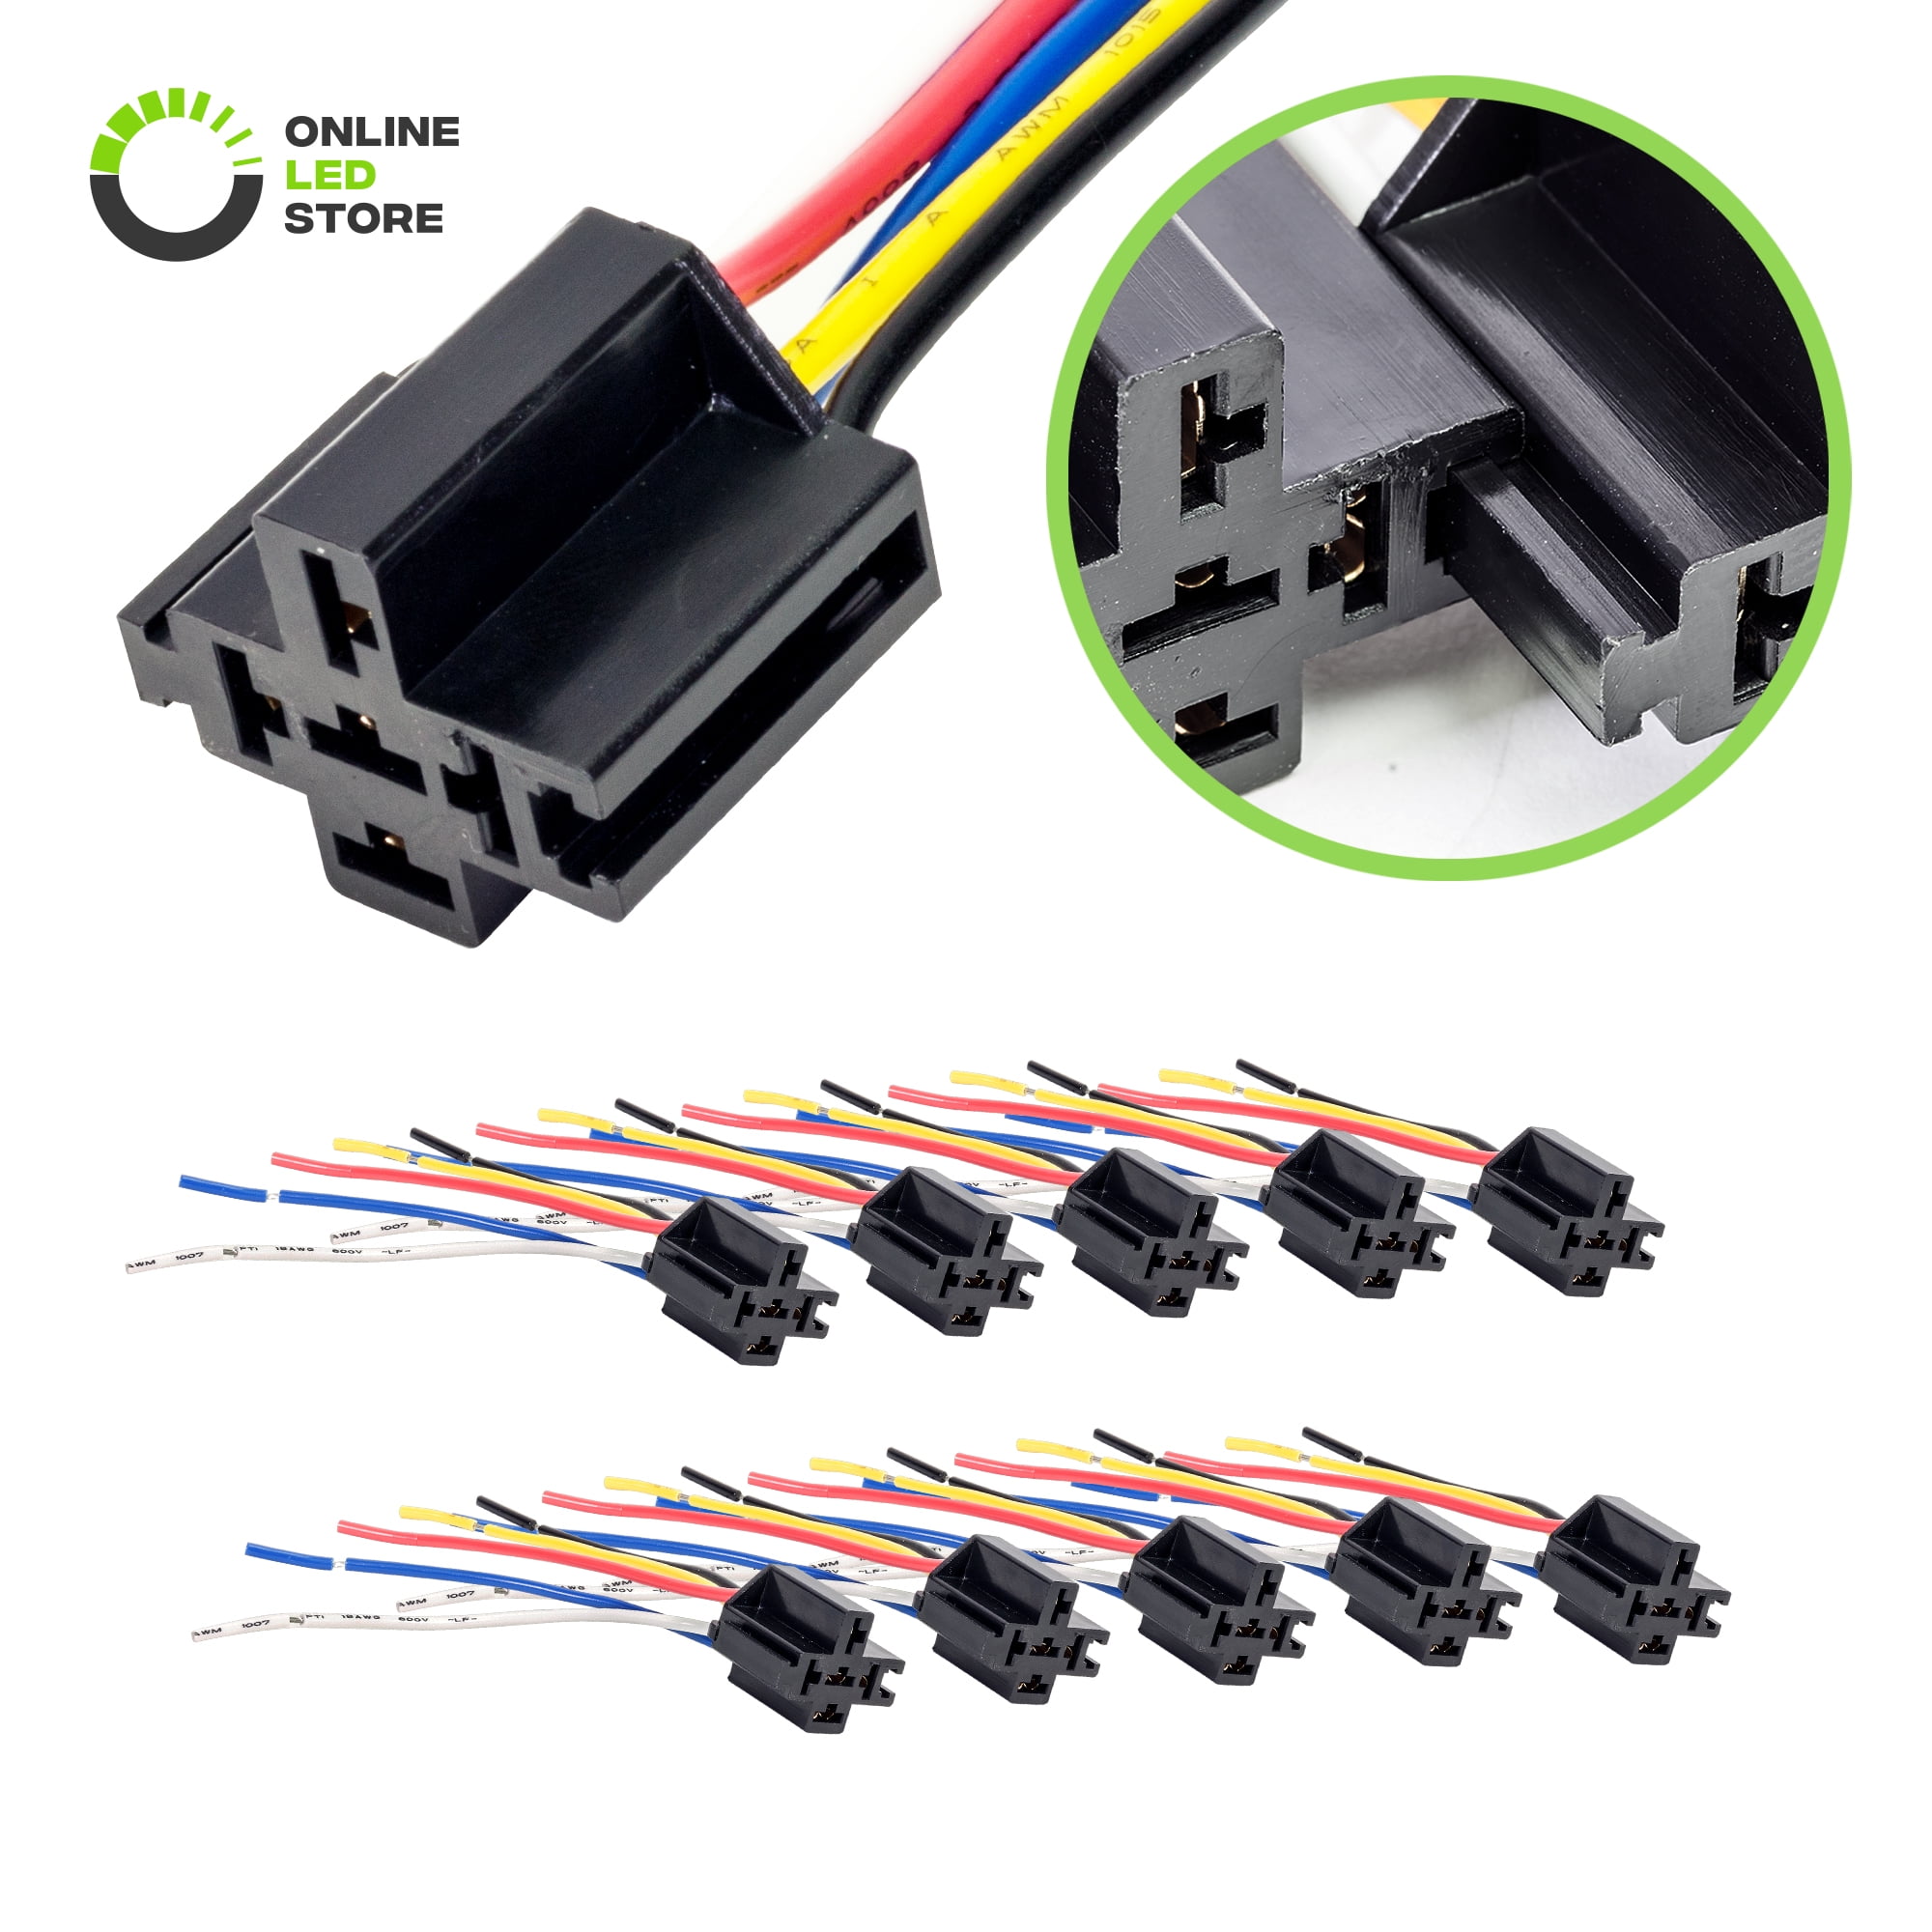 ONLINE LED STORE 10 Pack Bosch Style 12V DC 5-PIN SPDT Interlocking Relay Socket Harness Base with Wires 